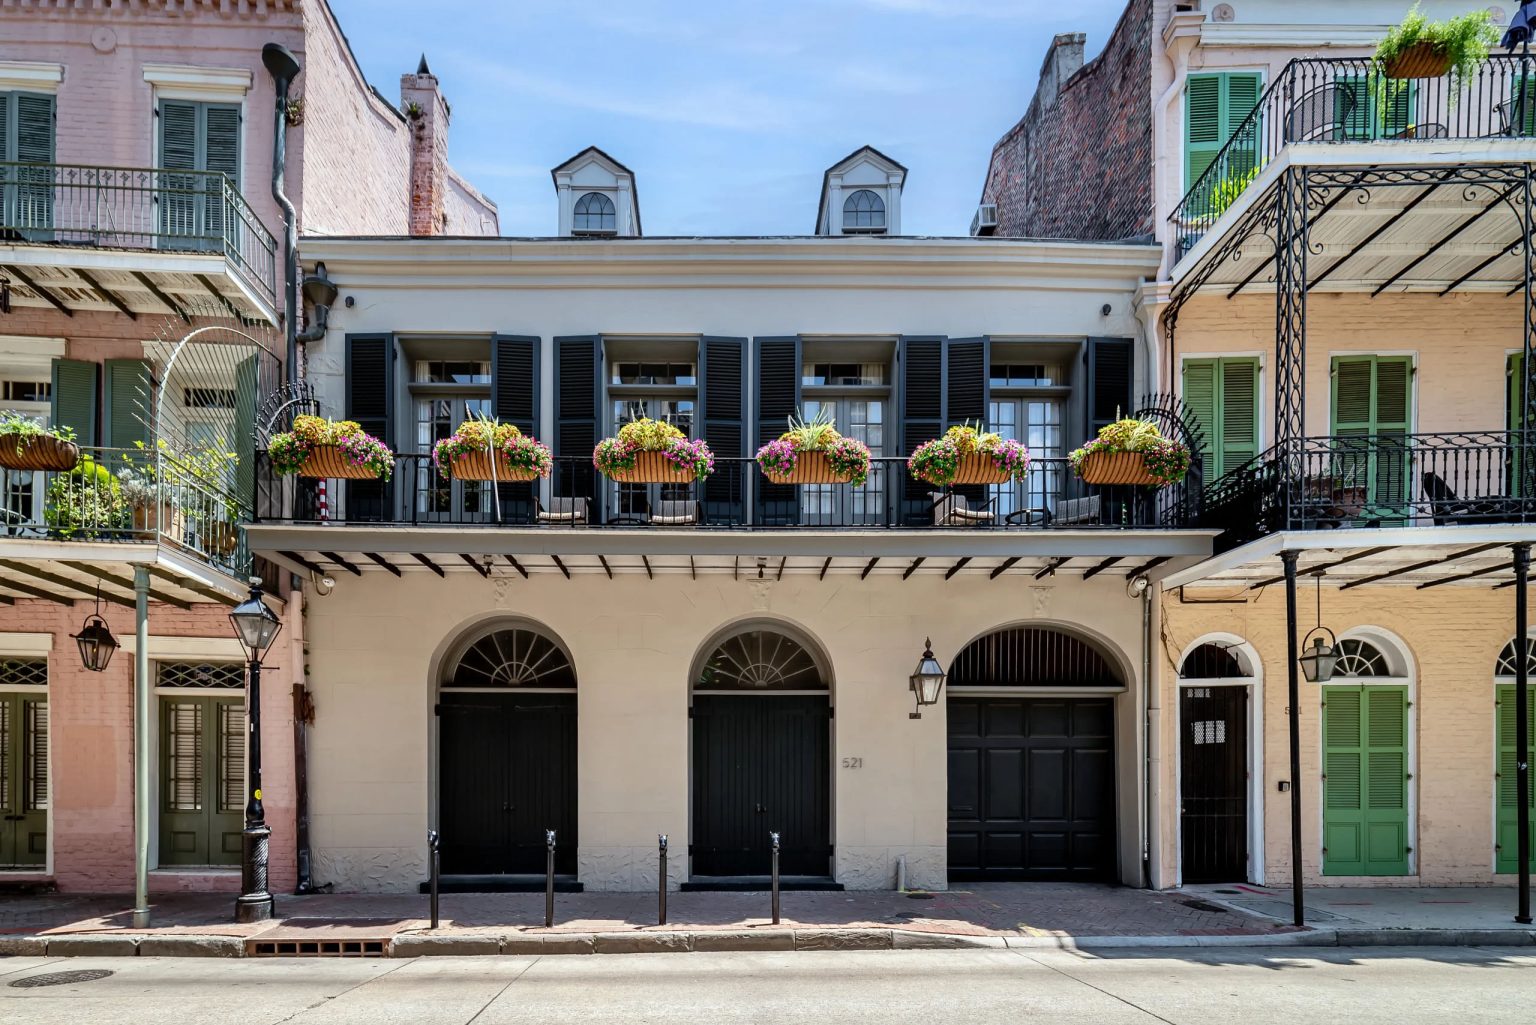 Brad and Angelina's New Orleans Mansion